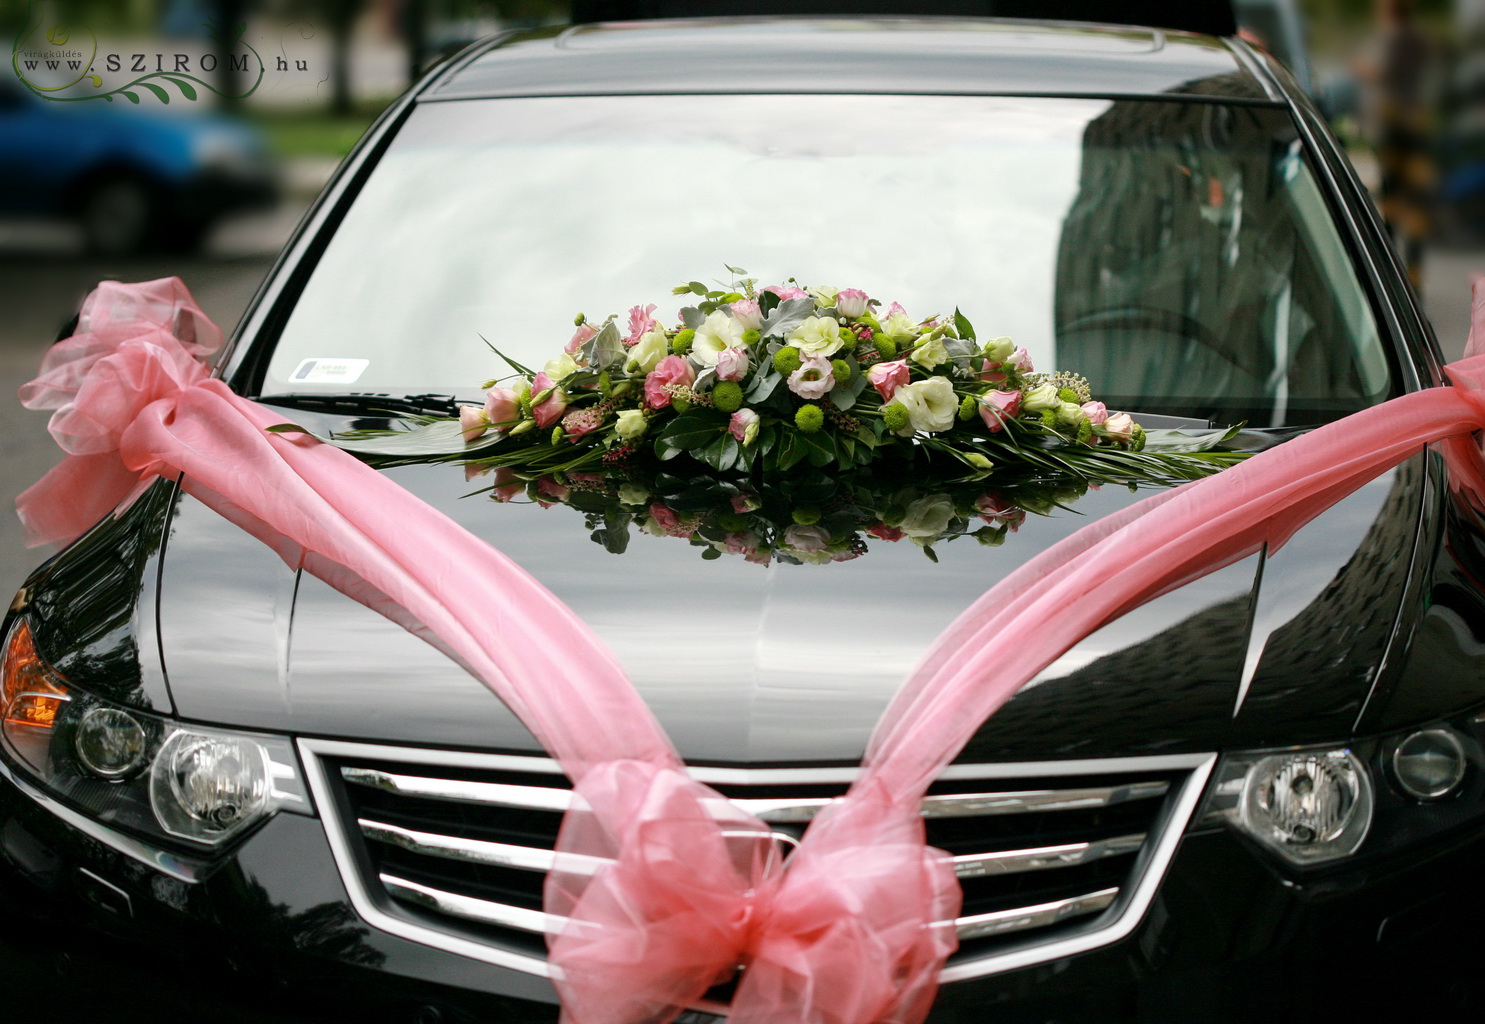 flower delivery Budapest - oval car flower arrangement with lisianthus. chrysanthemum, white, pink)